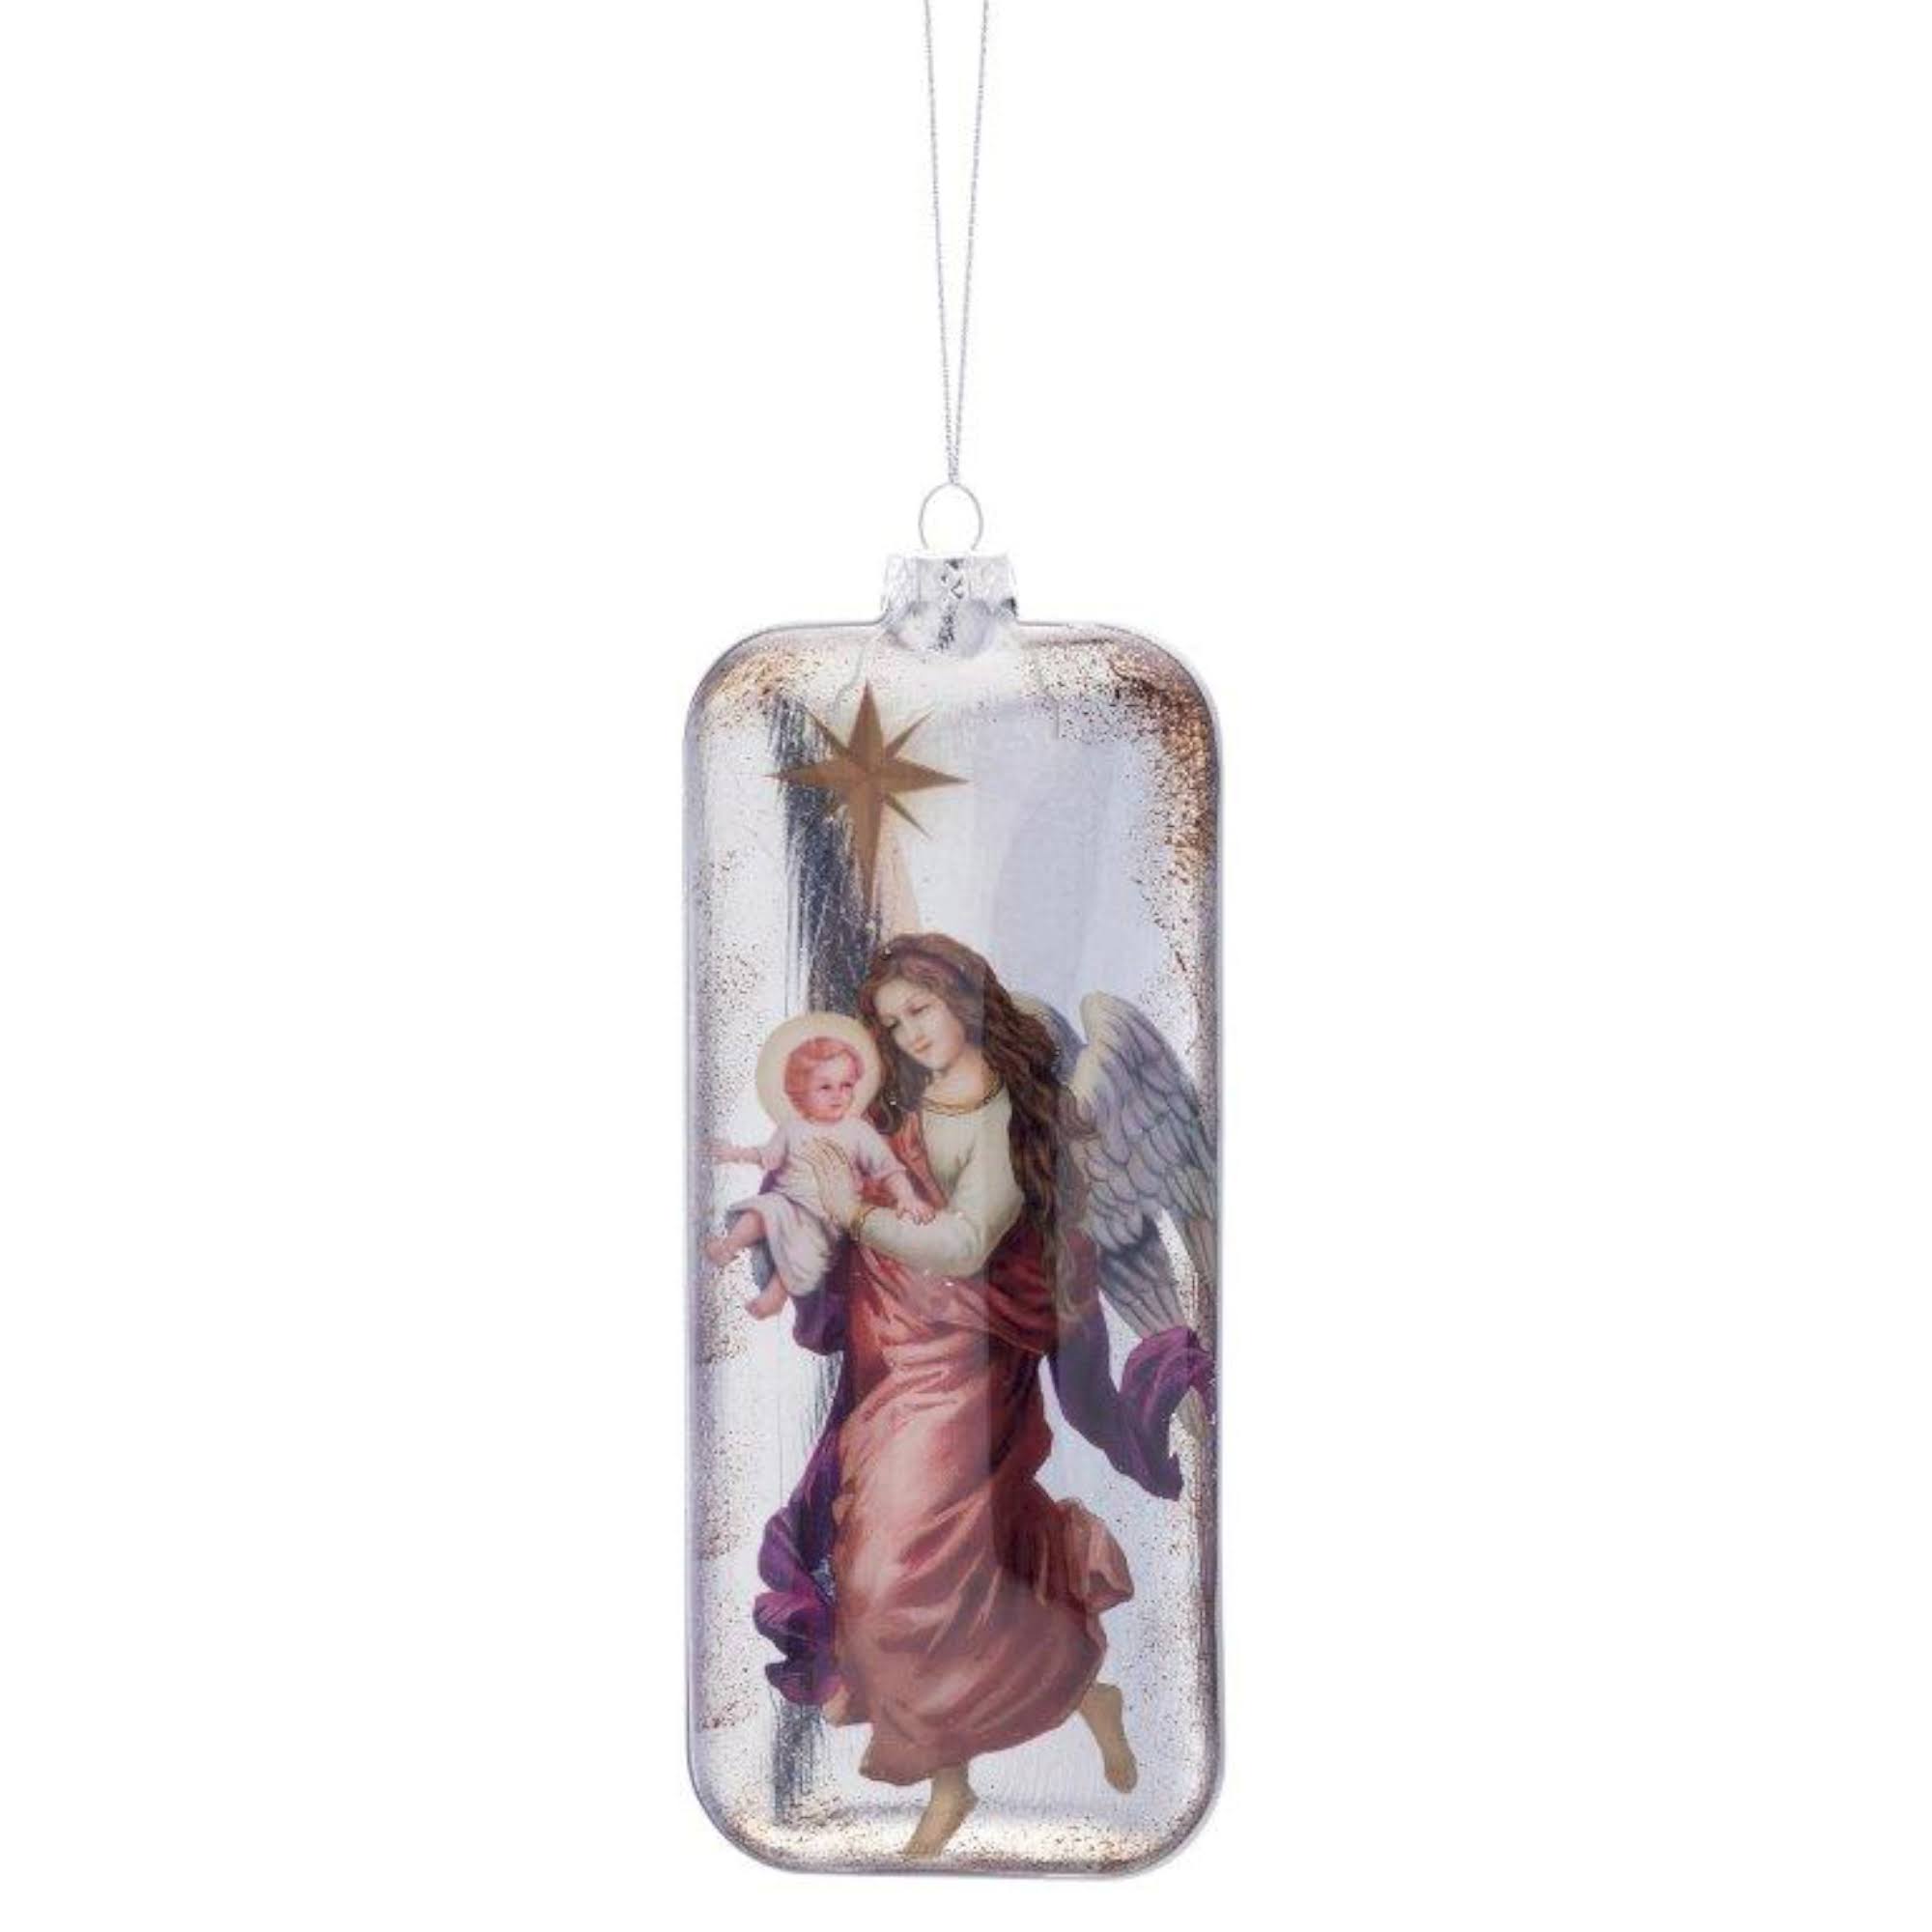 Set of 6 White Angel and Jesus Christmas Ornaments, 8"